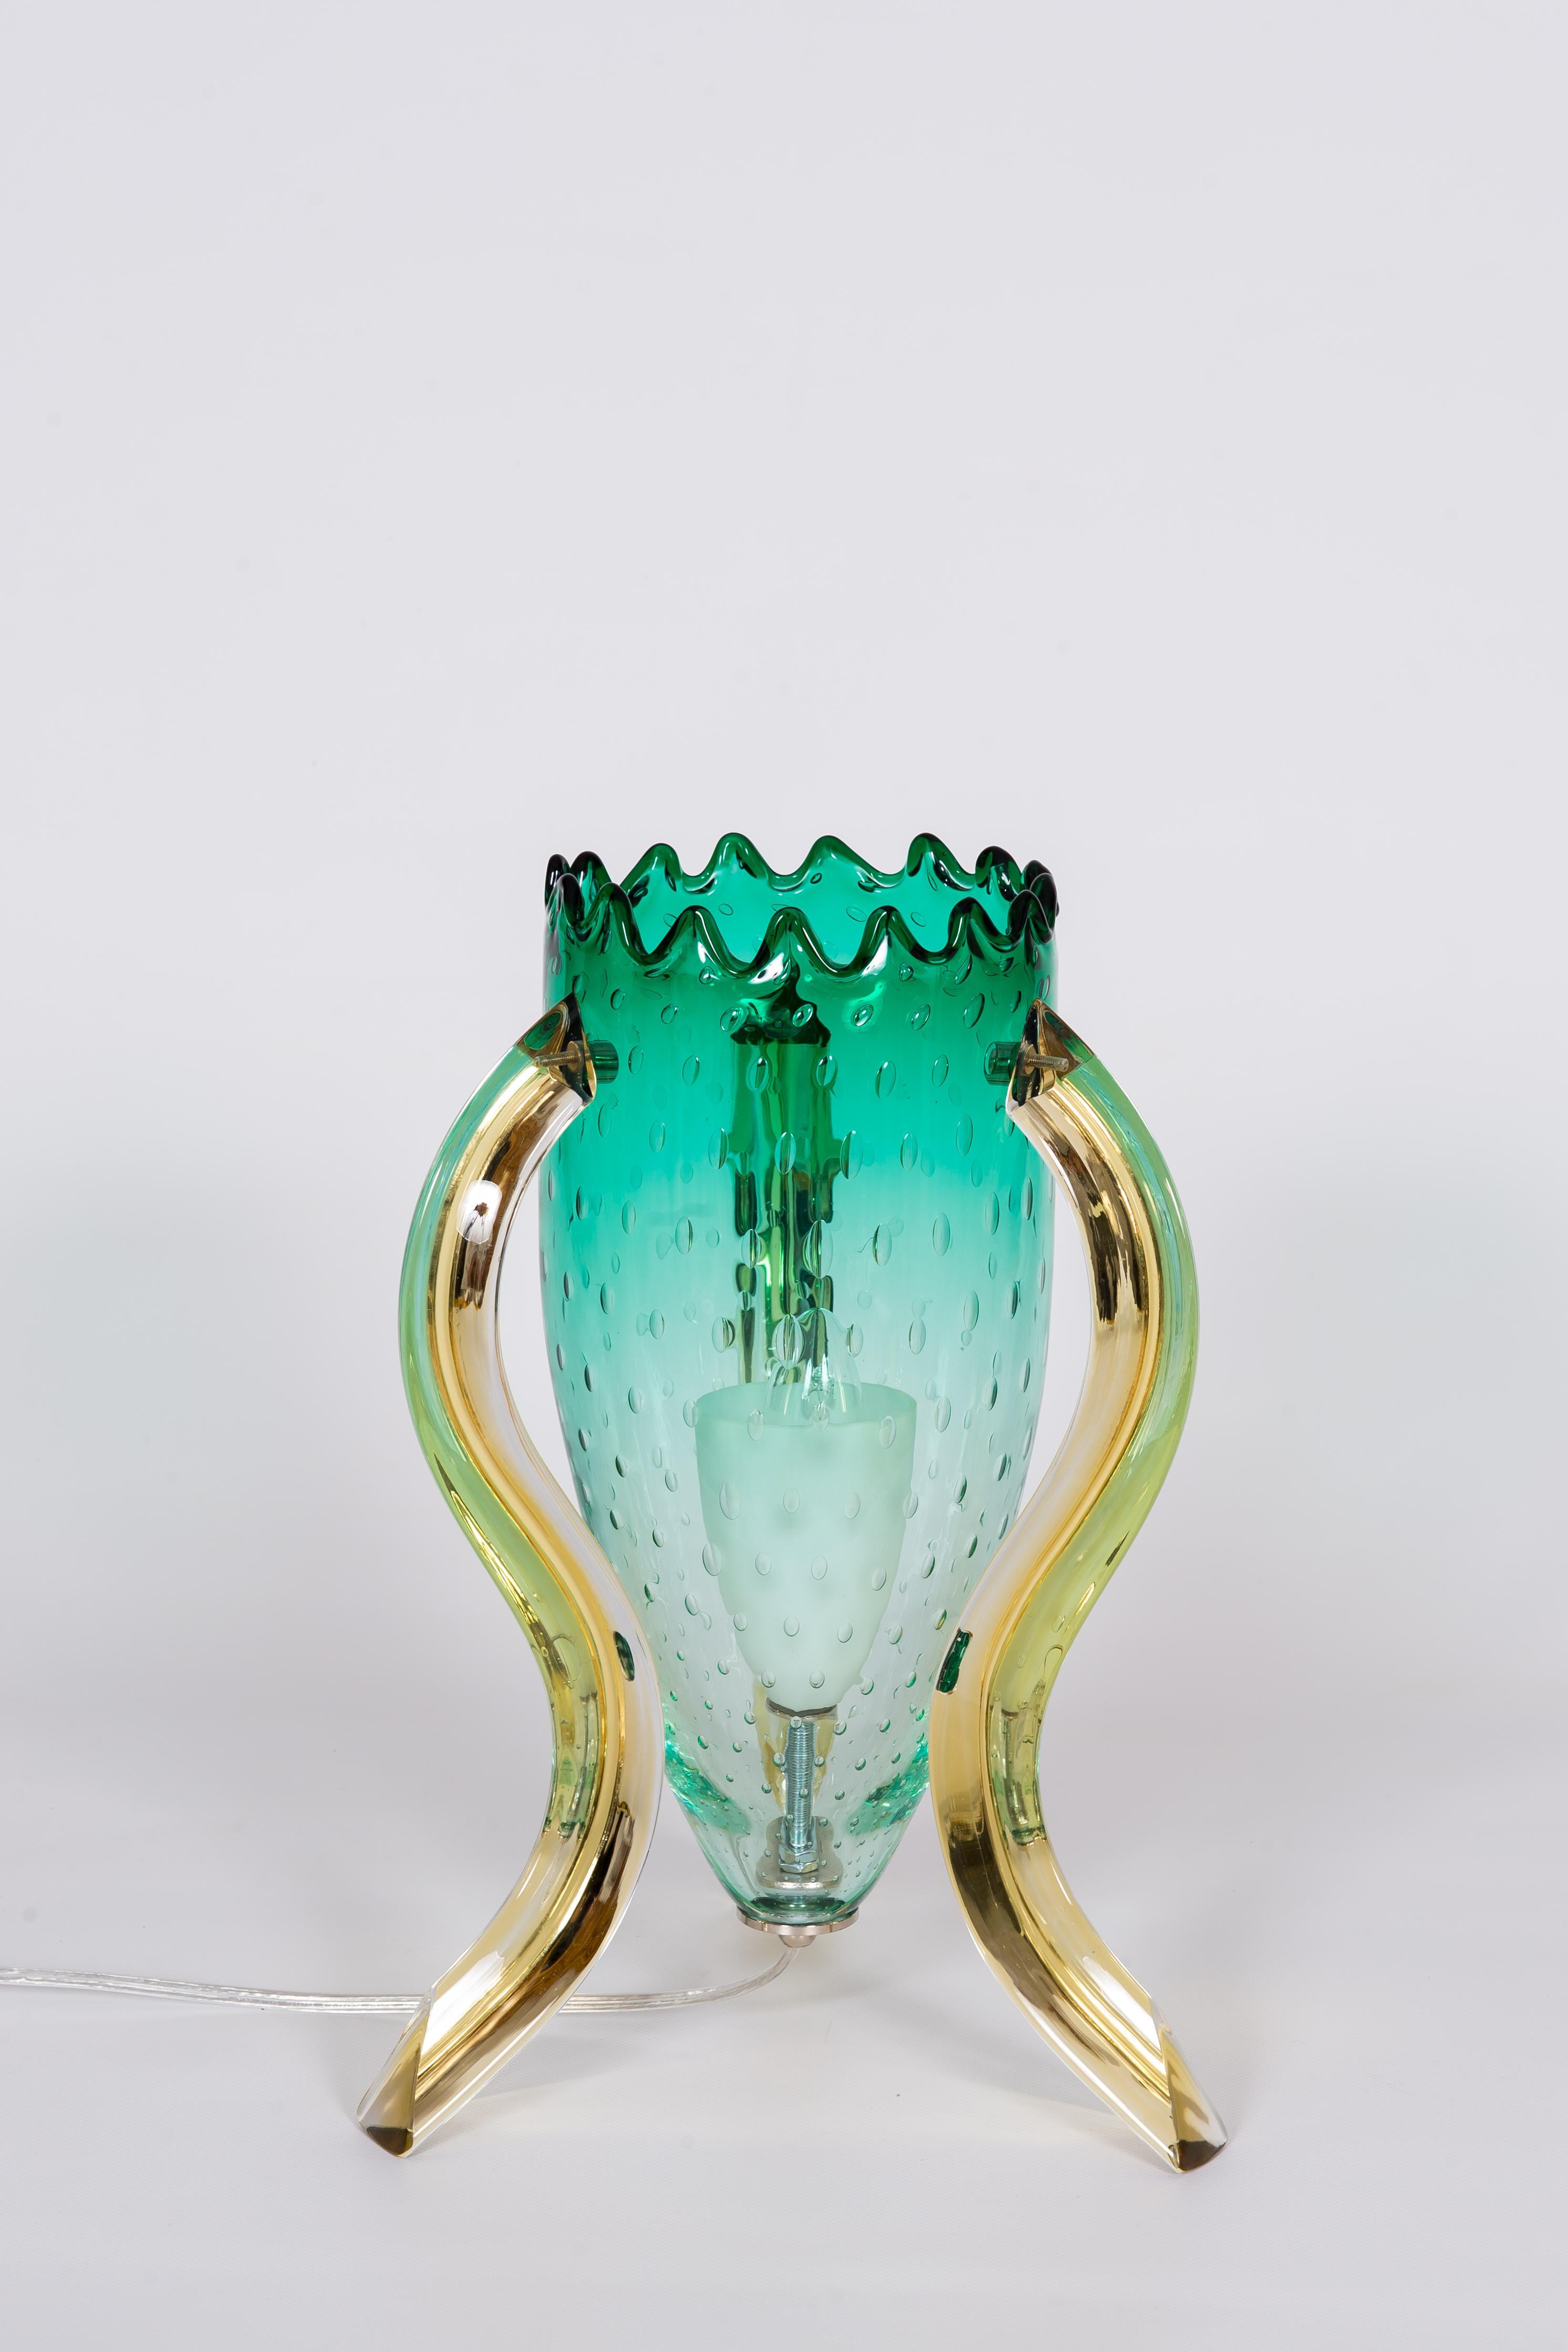 Italian Pair of Table Lamps in Blown Murano Glass Green and Amber limited, 1990s (Art déco)